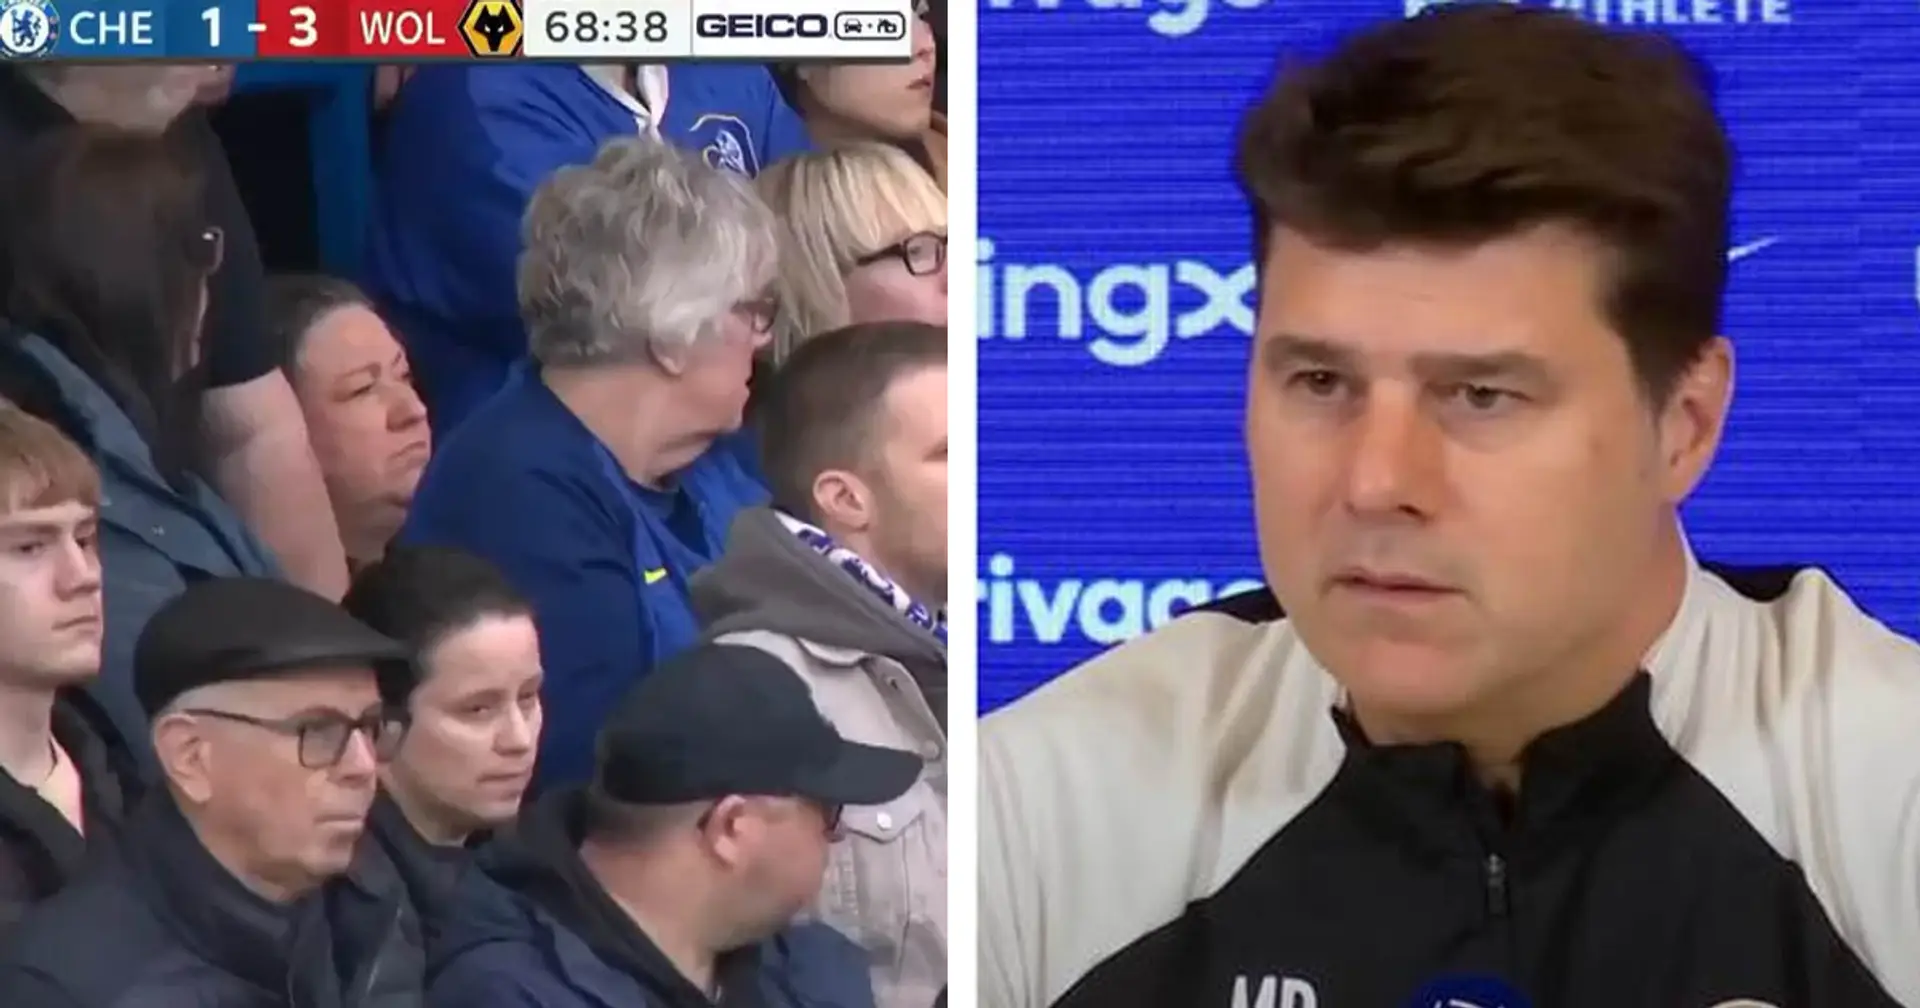 'I feel sorry': Pochettino sends message to Chelsea fans after Wolves humiliation